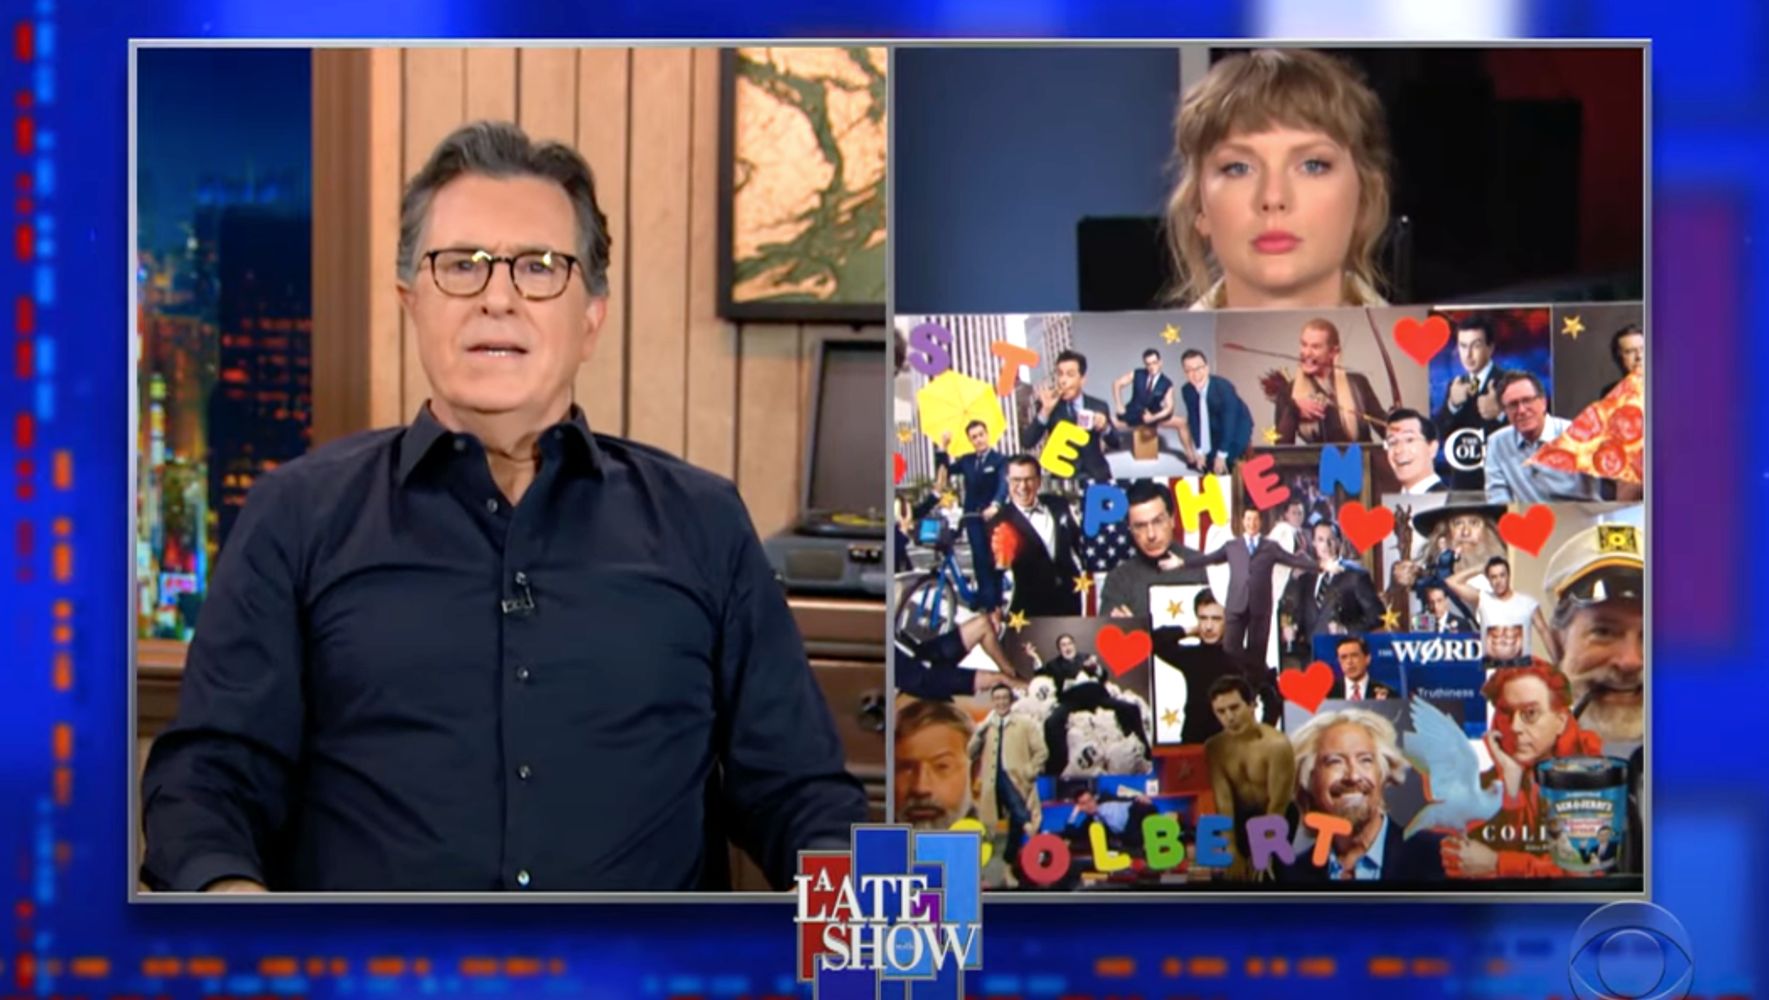 Taylor Swift Creeps Out Stephen Colbert During Awkward Dispute Over ‘Hey Stephen’